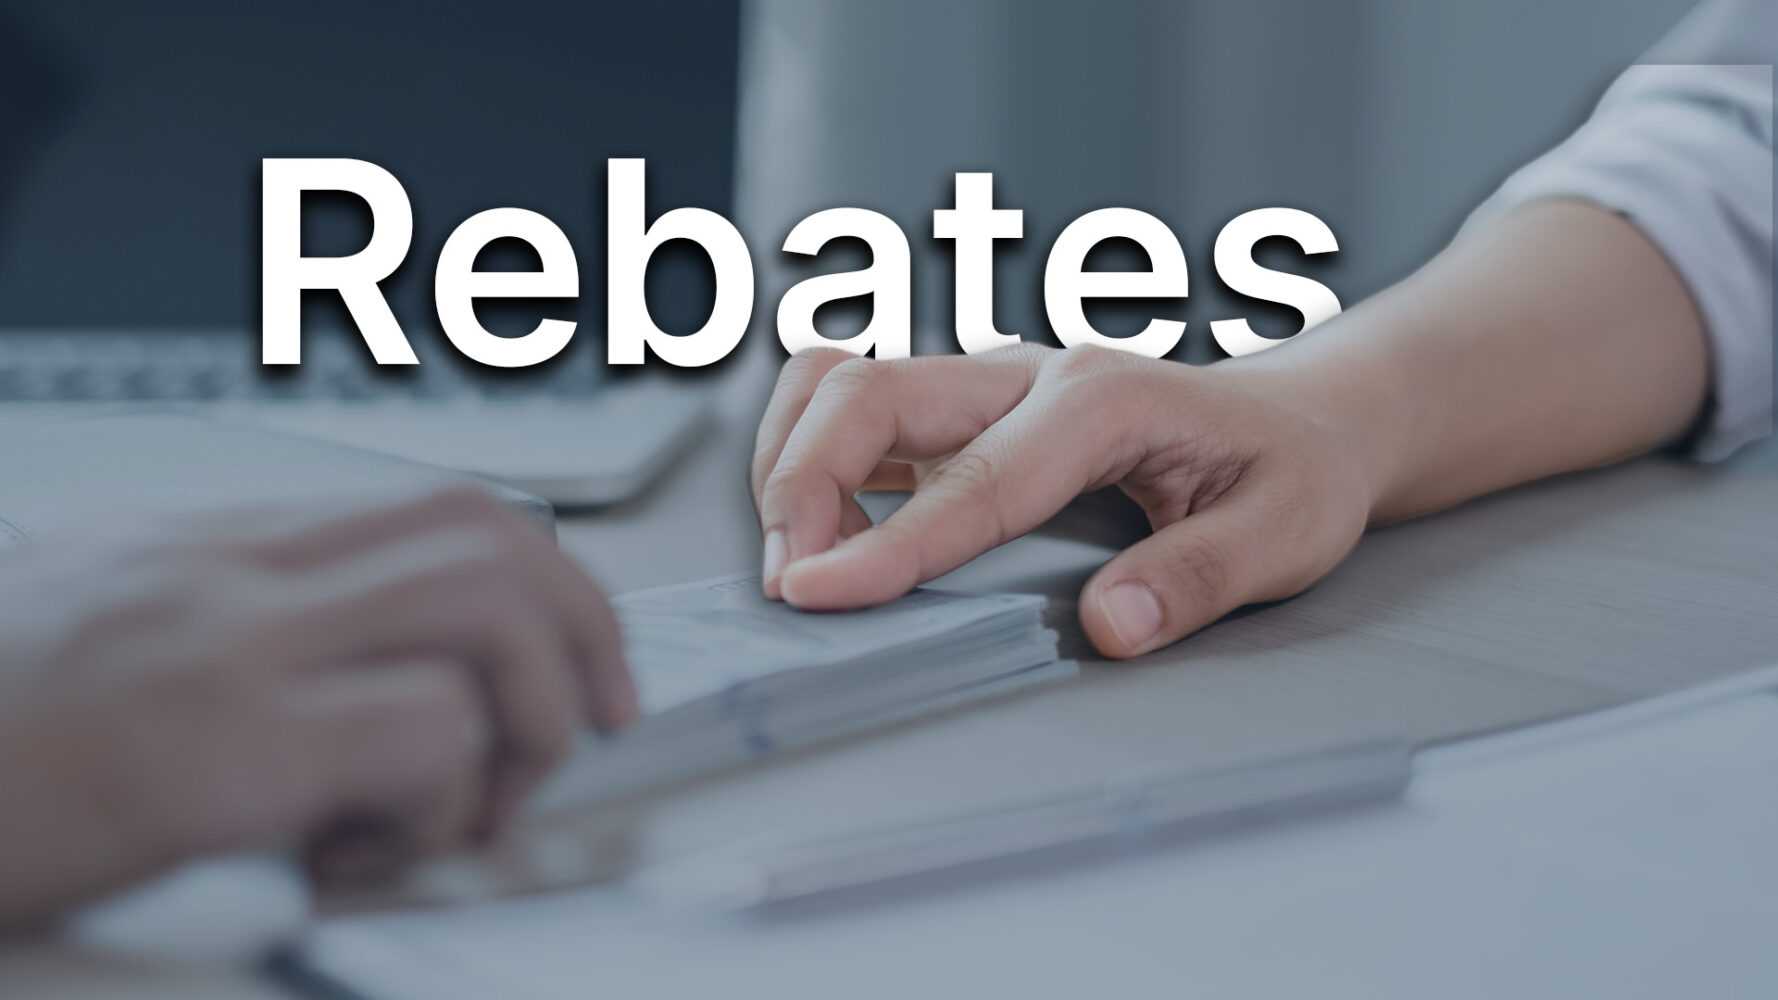 How To Avoid Issuing A Rebate itris 9 Recruitment CRM Showcase